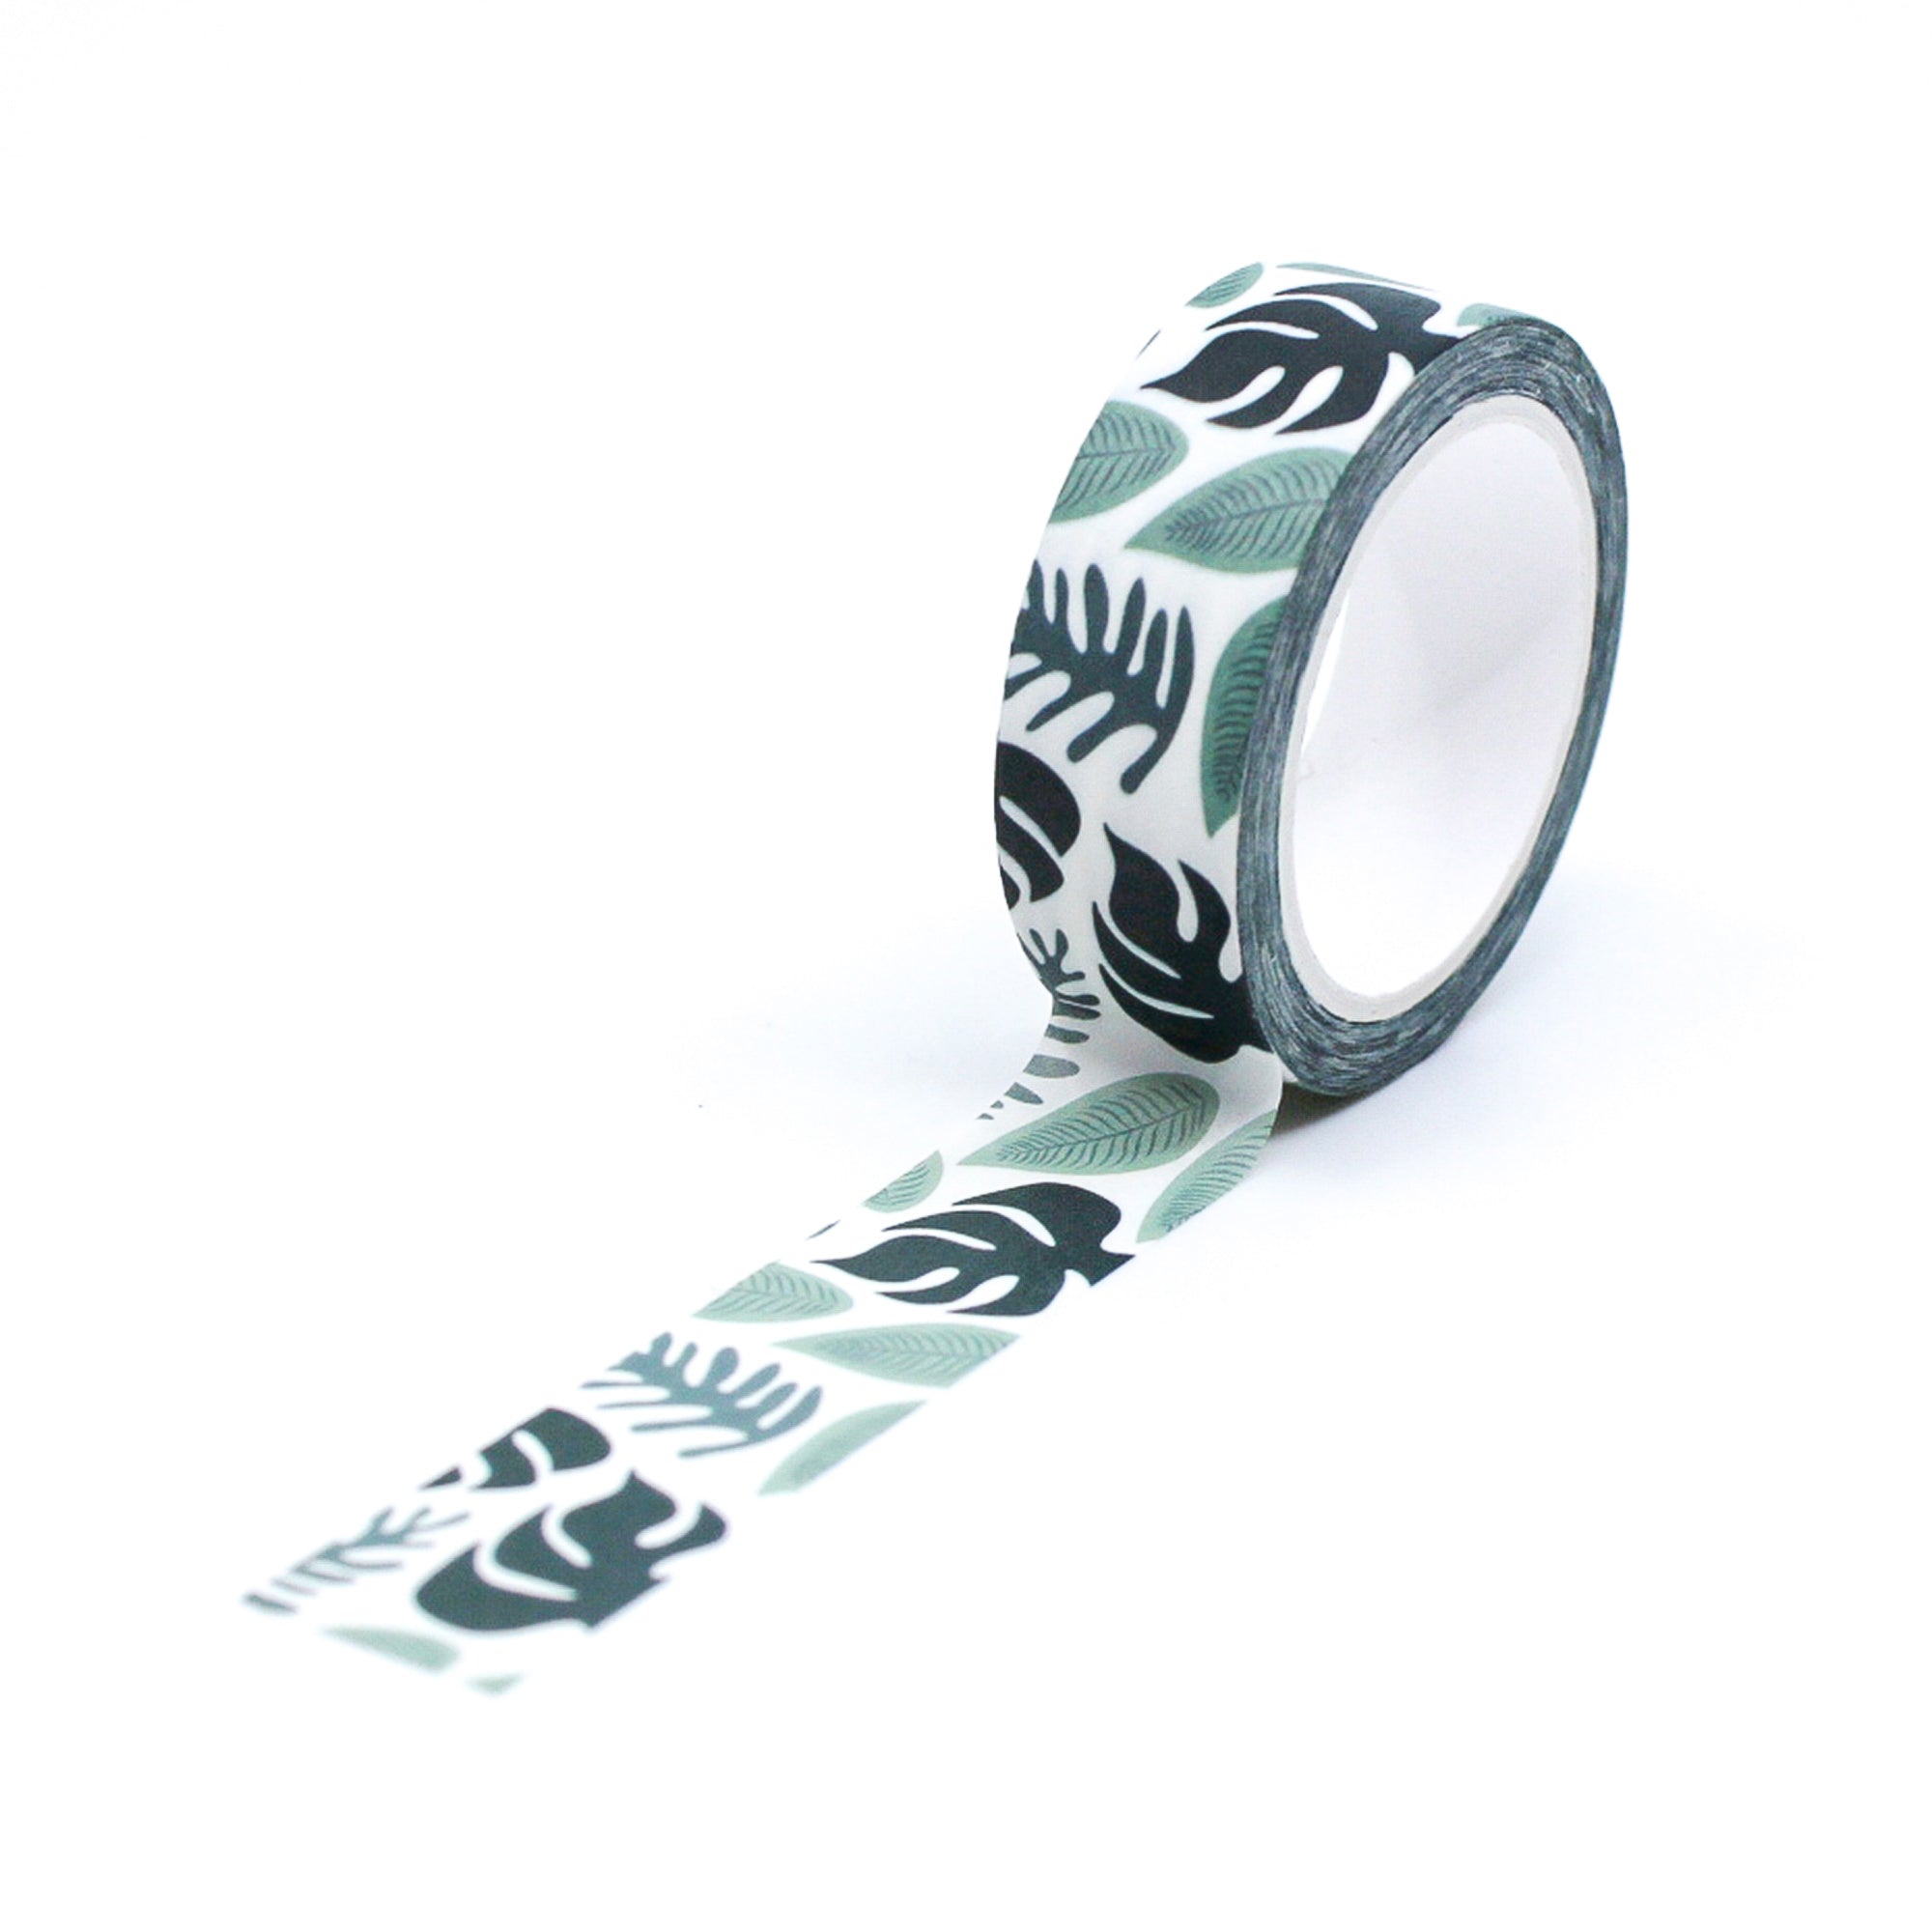 Explore the lushness of the rainforest with our Monstera Leaf Rainforest Washi Tape, adorned with vibrant monstera leaf illustrations. Ideal for adding a touch of tropical beauty and greenery to your projects. This tape is from Maylay Co. and sold at BBB Supplies Craft Shop.